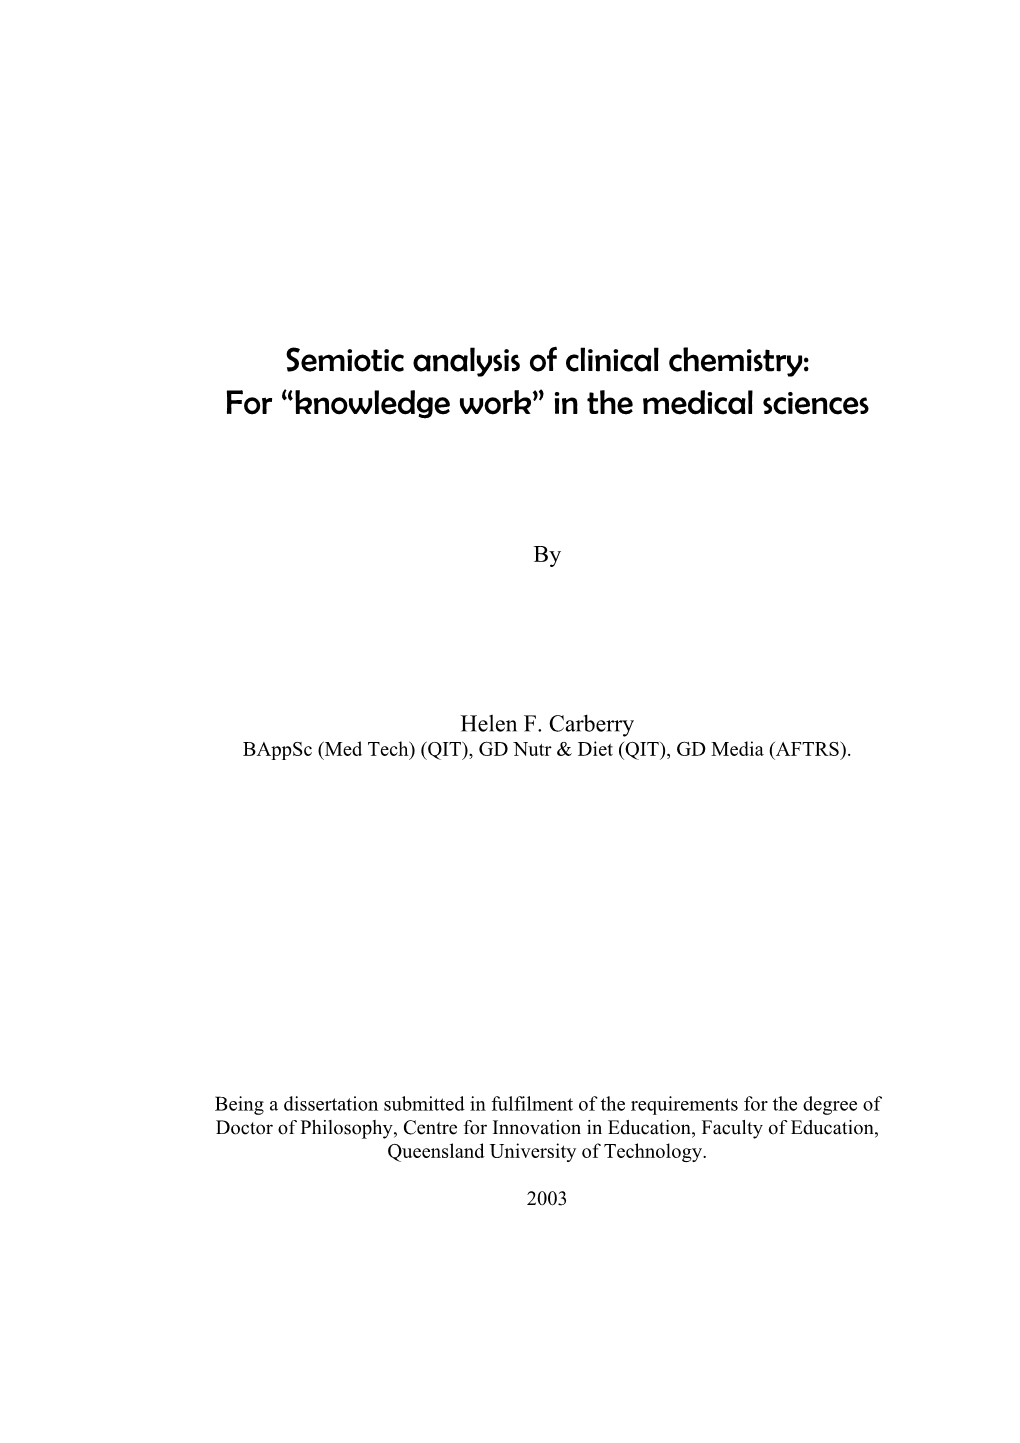 Semiotic Analysis of Clinical Chemistry: for “Knowledge Work” in the Medical Sciences